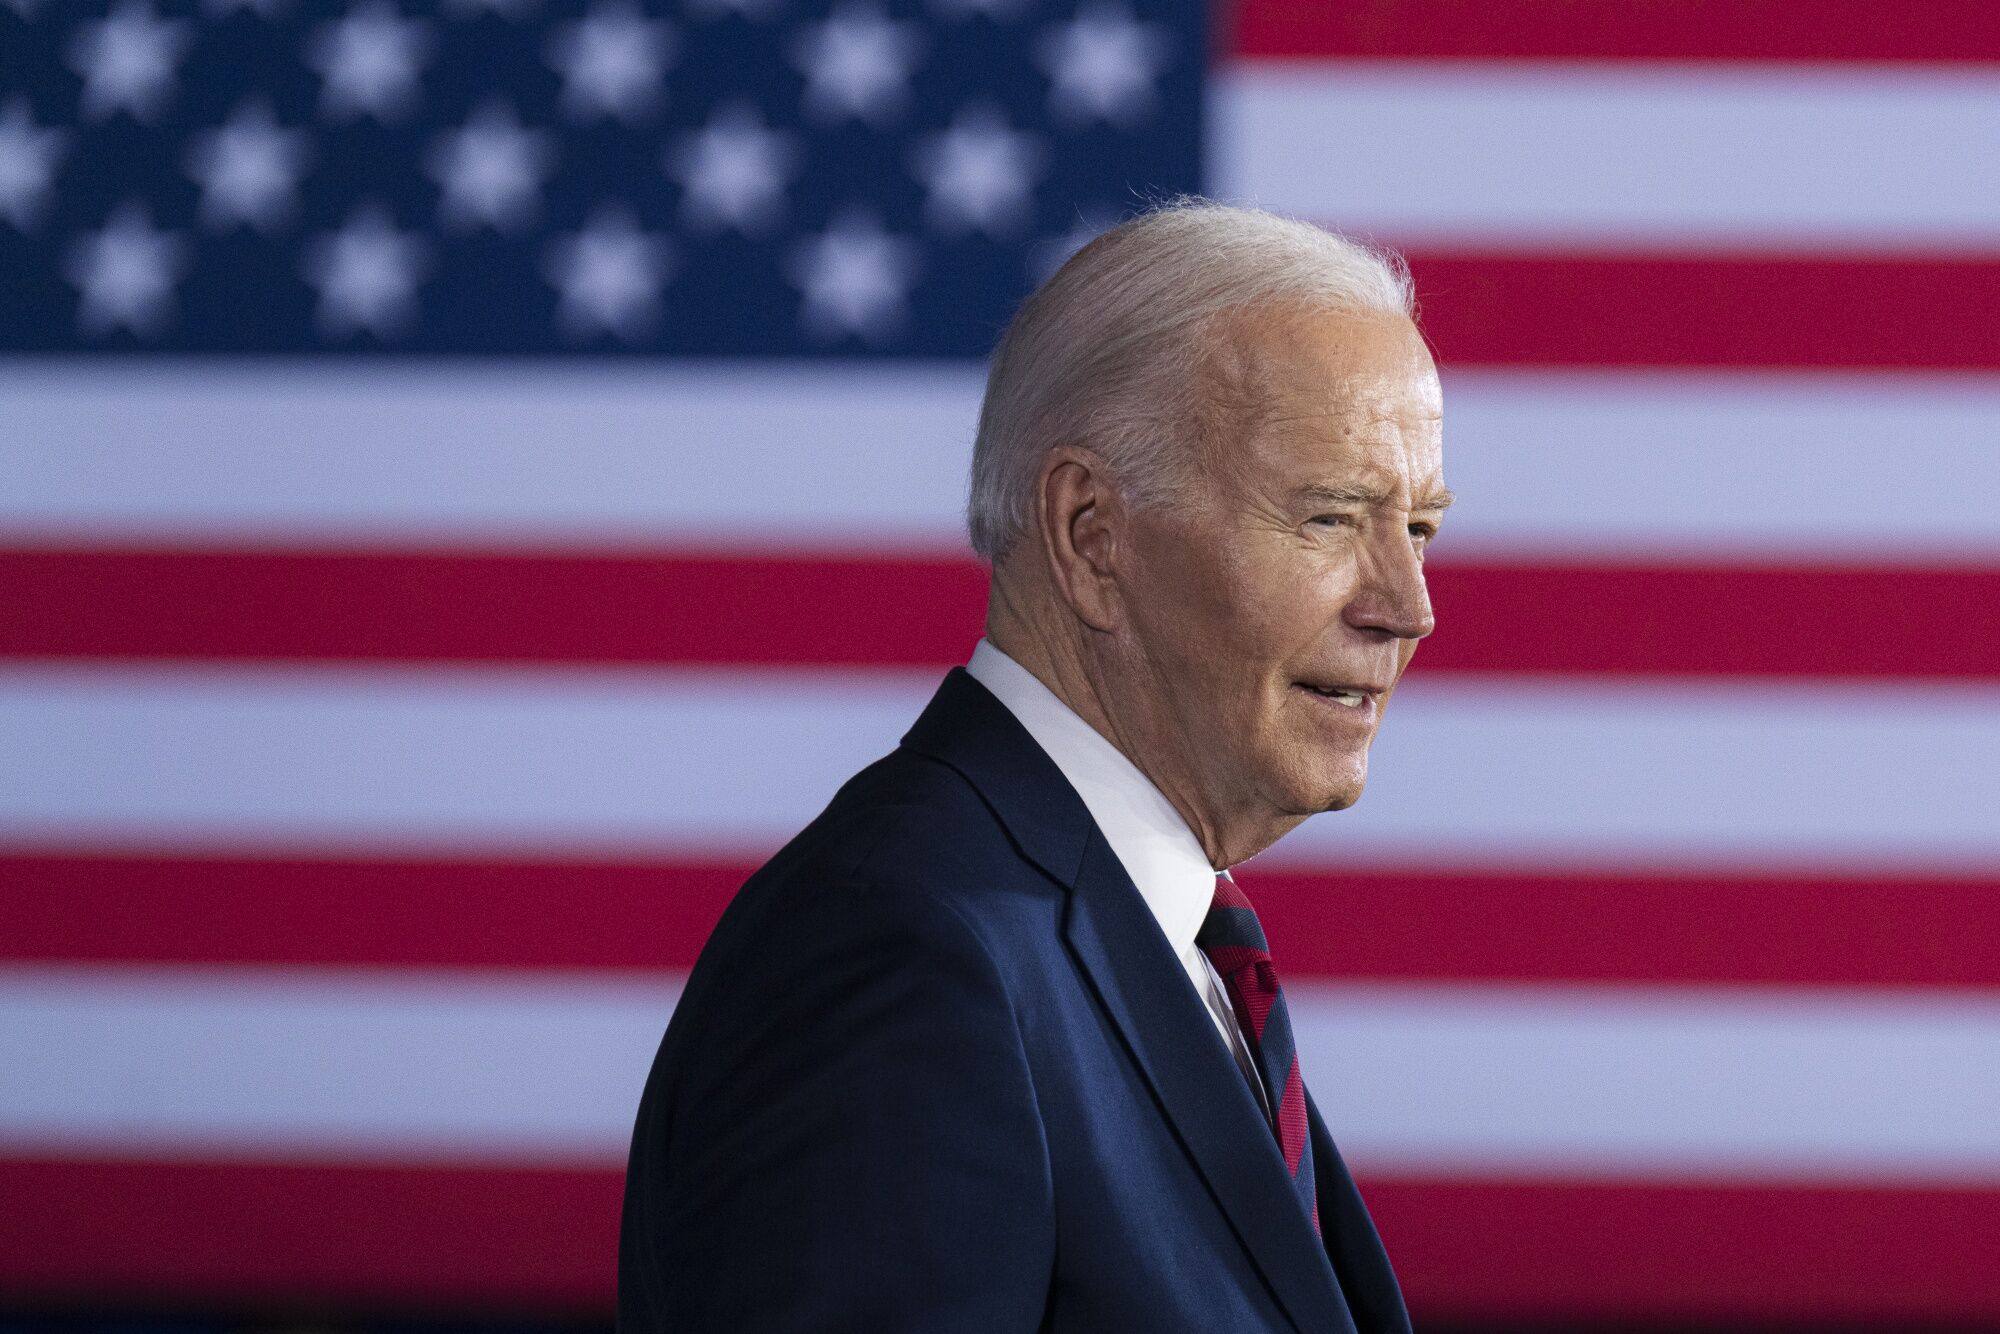 US President Joe Biden. The American leader had issued an executive order on February 28 restricting access to sensitive American “bulk data”. Photo: Bloomberg